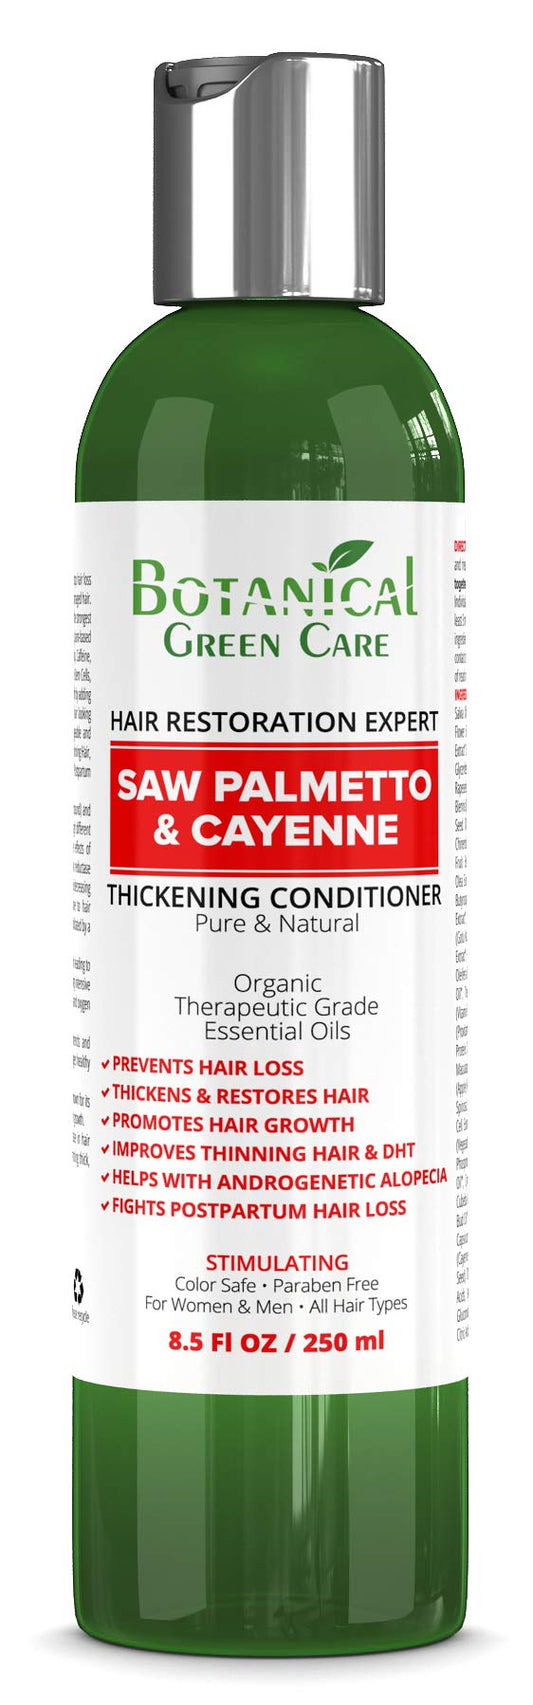 "Saw Palmetto & Cayenne" Hair Growth Anti-Hair Loss CONDITIONER. Alopecia Prevention and DHT Blocker. Doctor Developed